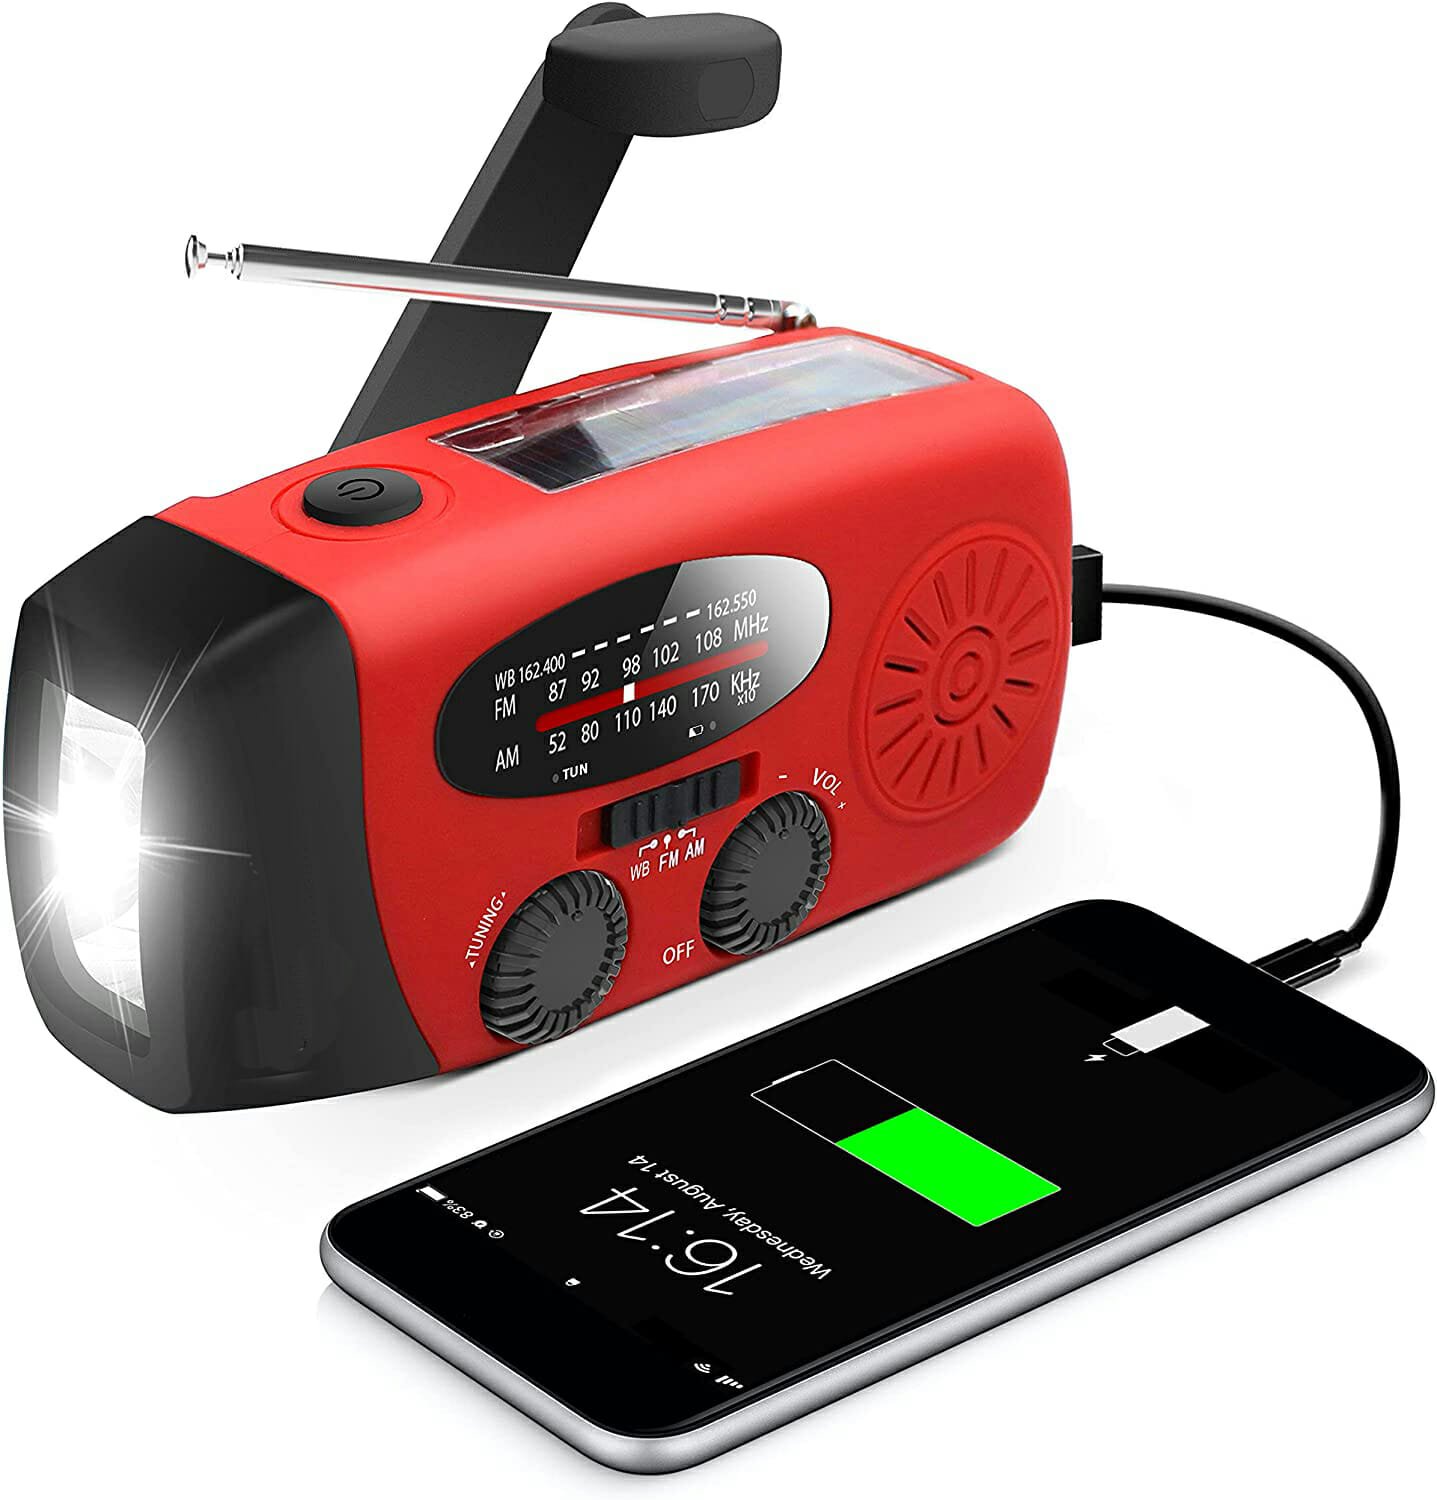 Emergency Radio with Solar and Crank Portable Battery USB Recharging FM/AM Radio with Bluetooth Speakers LED Flashlight Camping Lantern 2300 mAh Power Bank Phone Charger MP3 Player Siren Red 